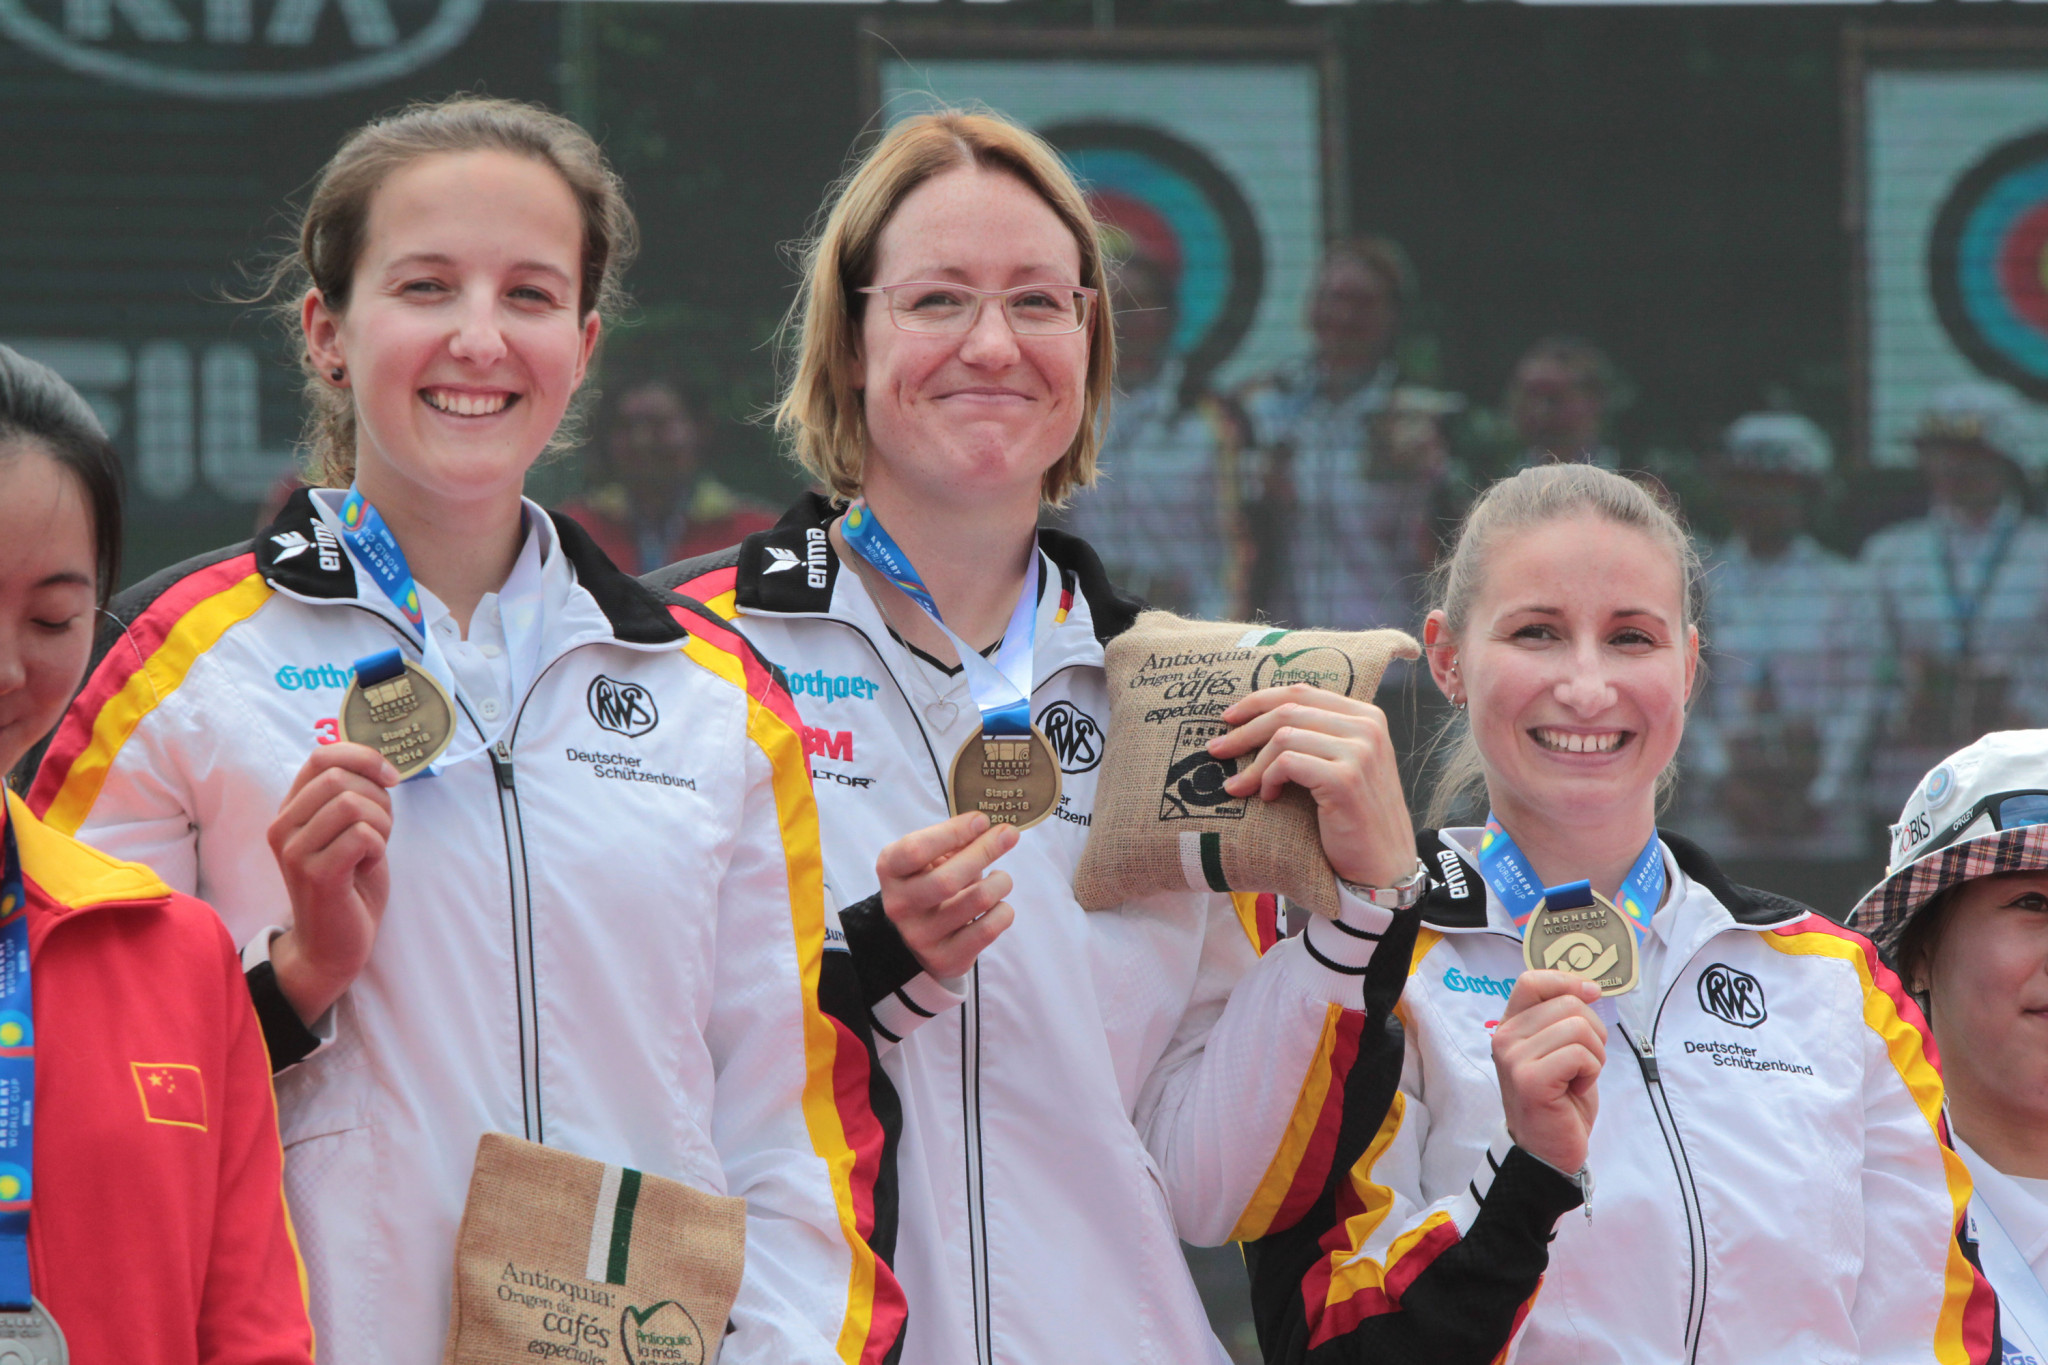 Elena Richter, left, was part of the gold medal-winning German team at the Archery World Cup in Colombia in 2014 ©Getty Images